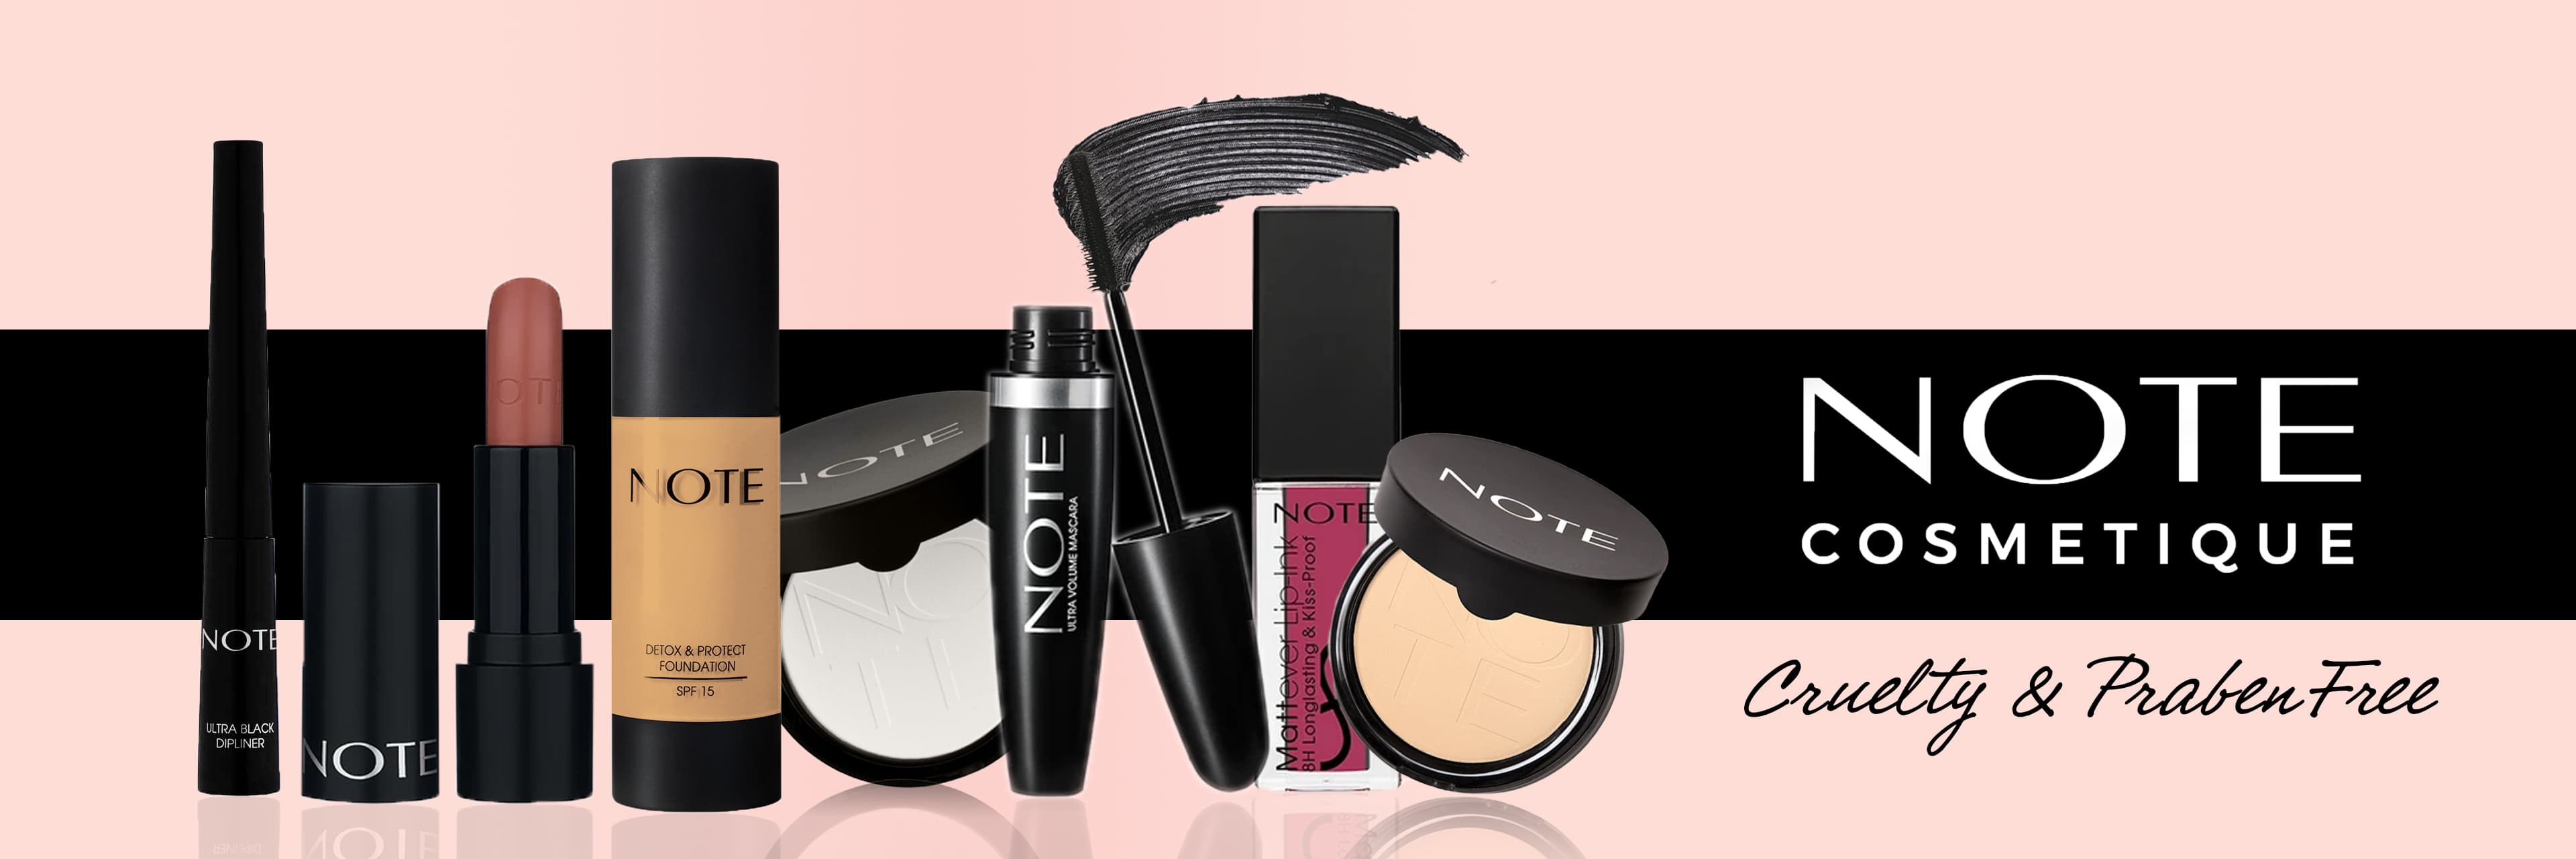 note-cosmetics-collection